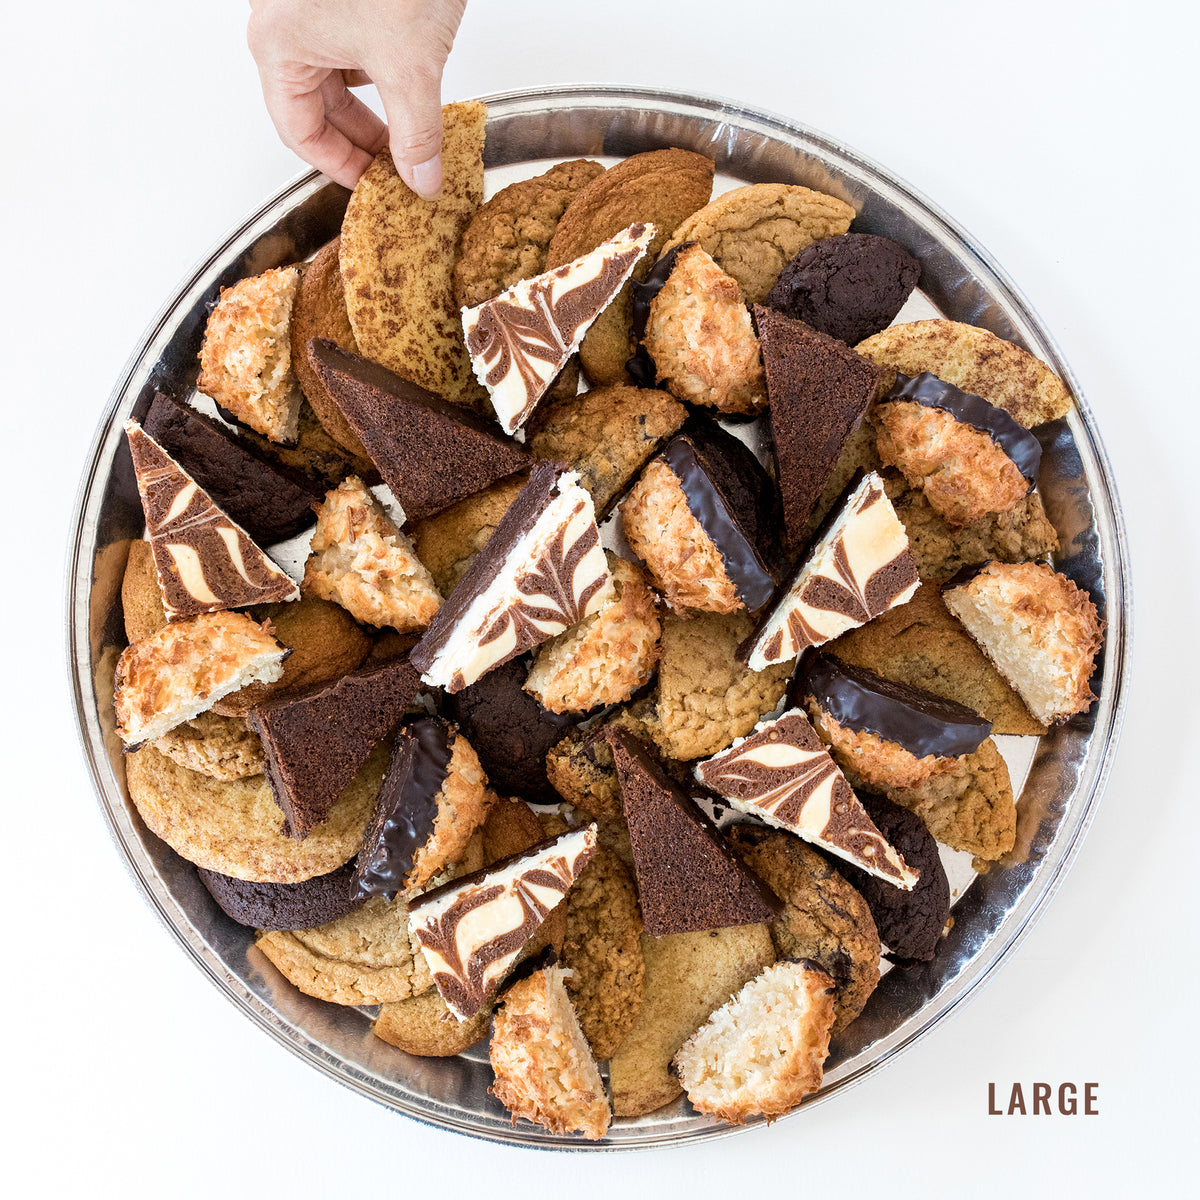 Cookie Tray-Large